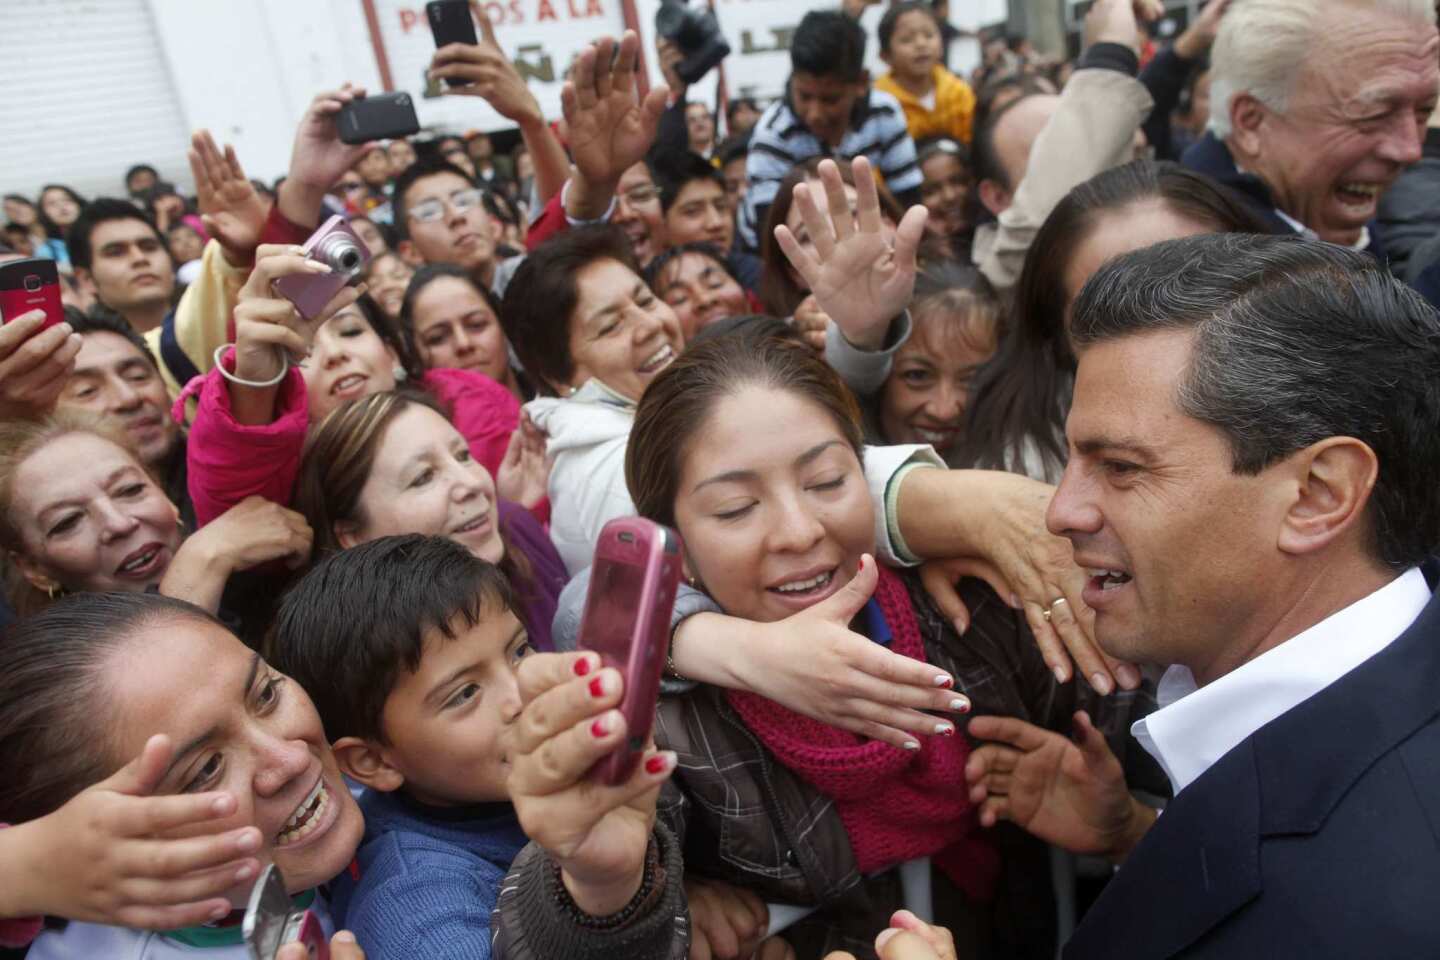 Enrique Pena Nieto, presidential candidate of the Revolutionary Institutional Party, or PRI, greets supporters after casting his vote in Atlacomulco, Mexico.